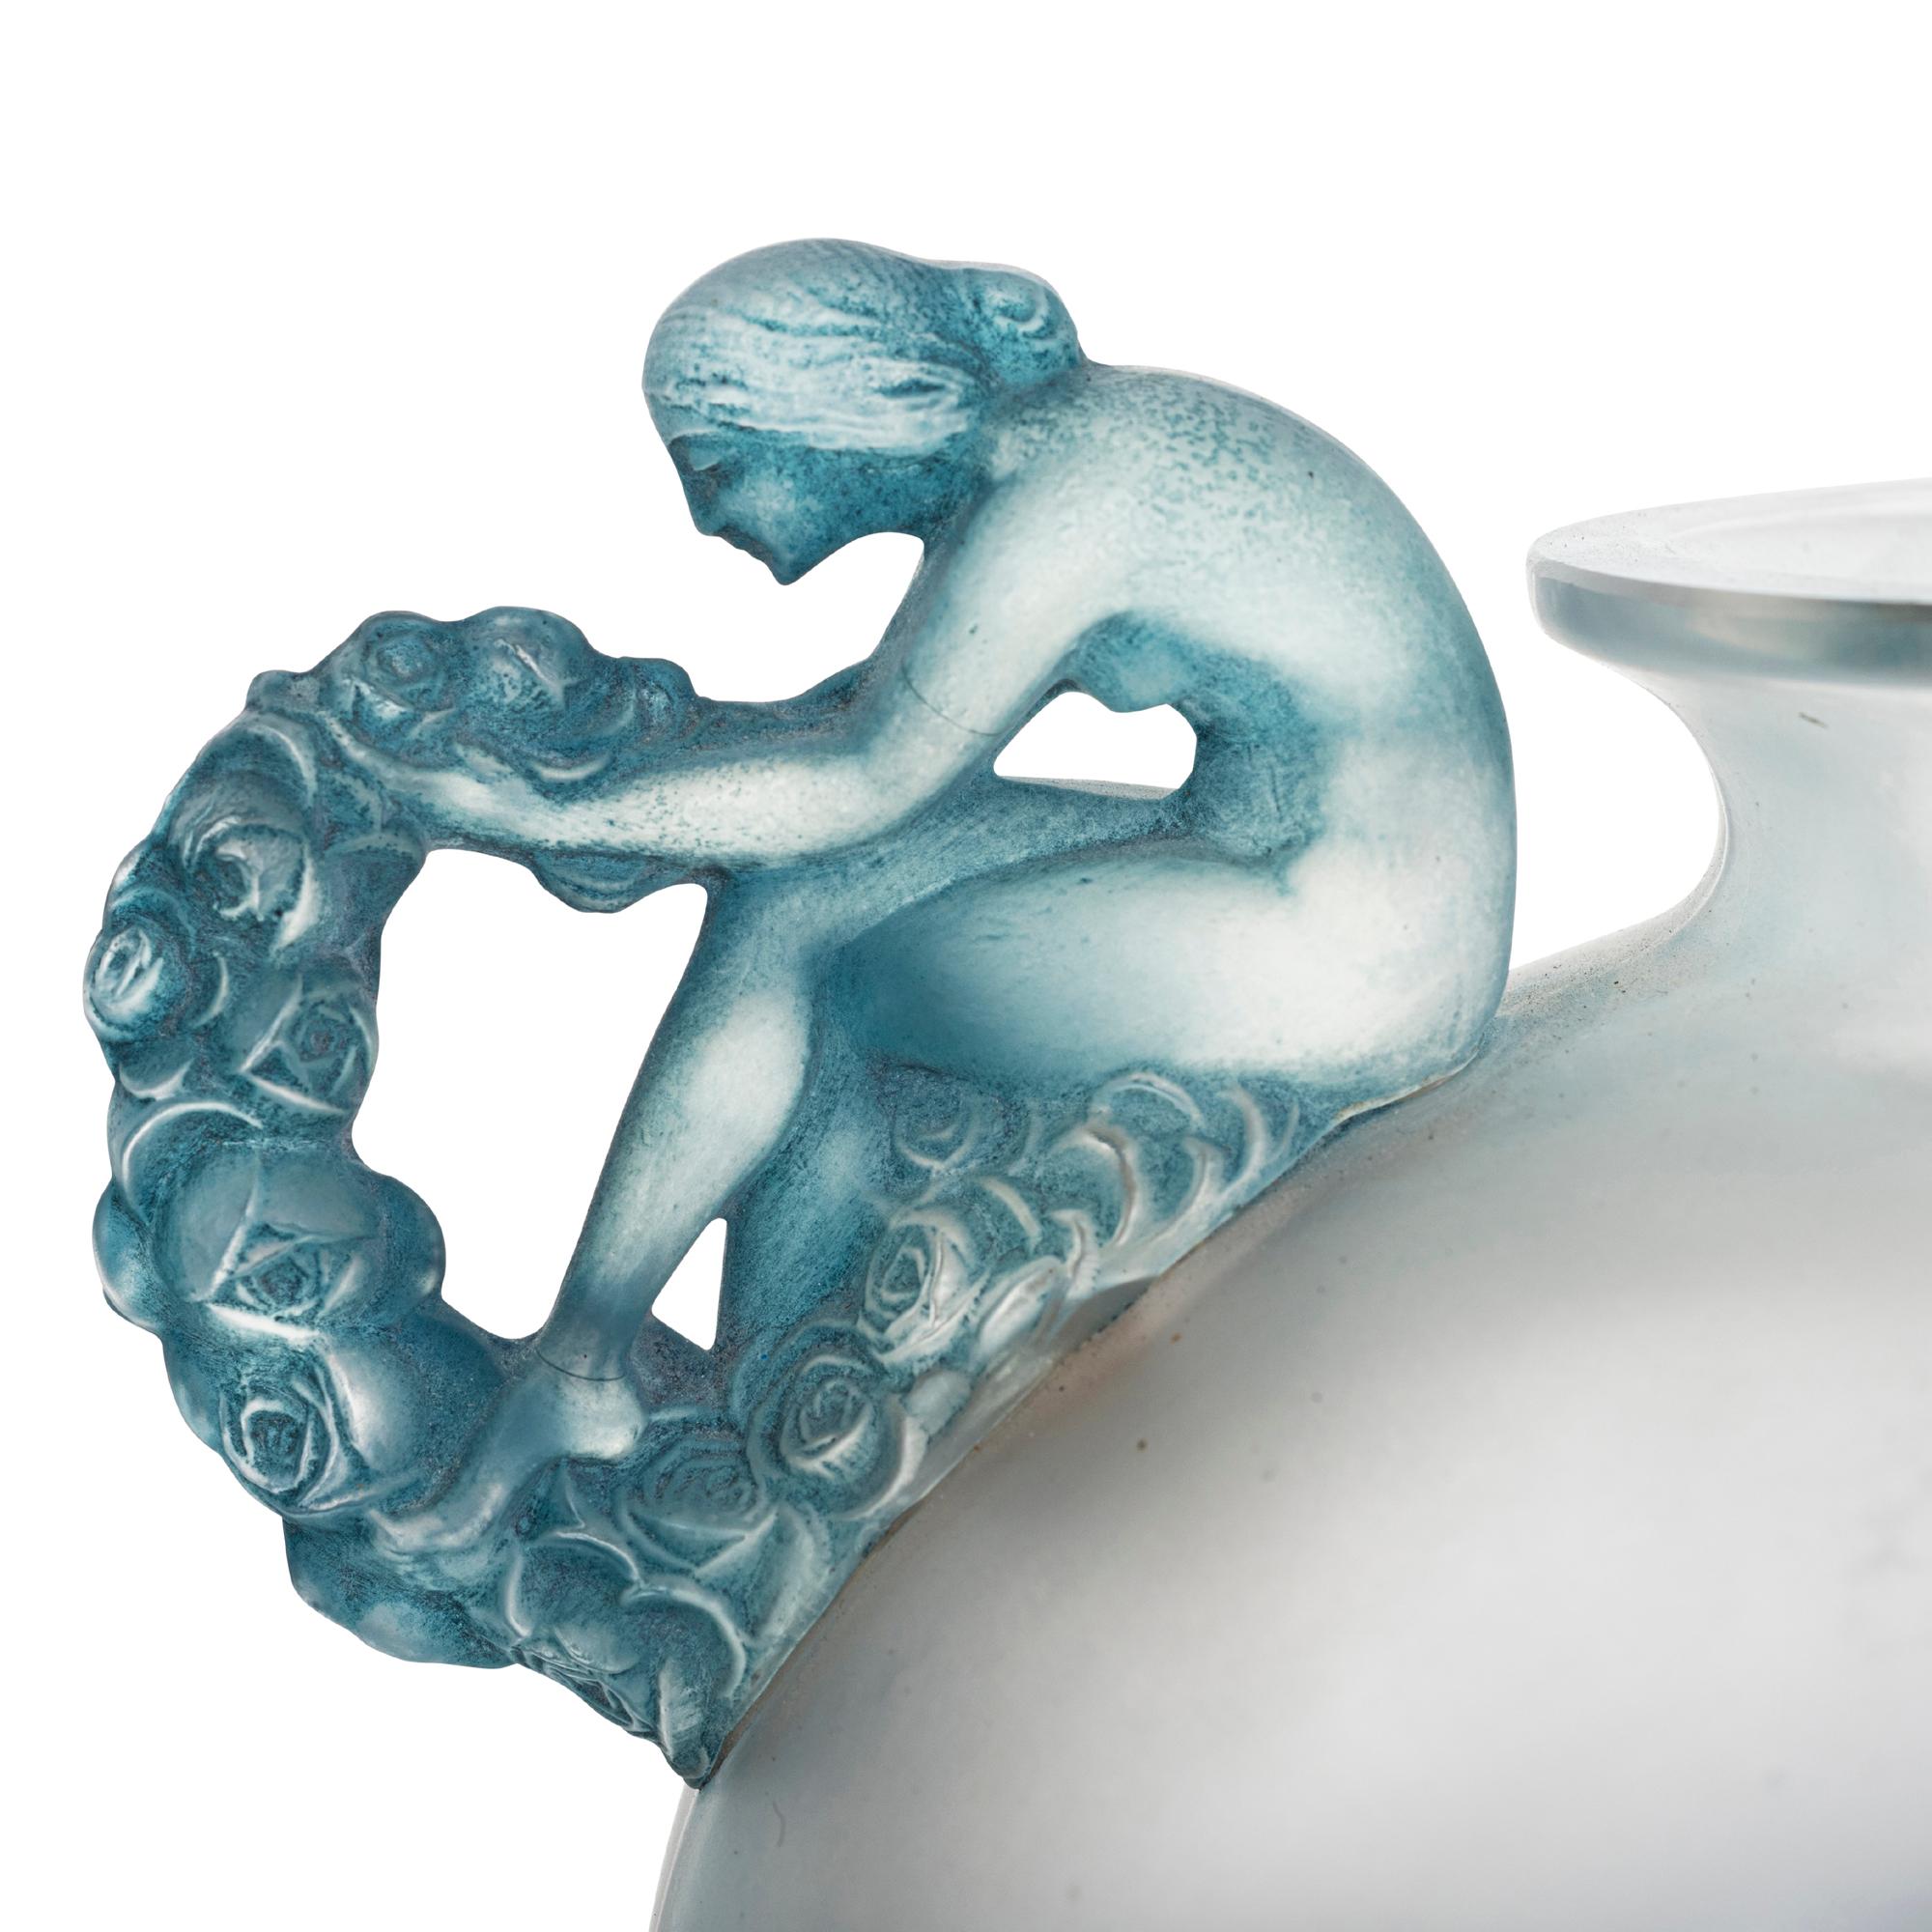 René Lalique, (1860-1945)
'BOUCHARDON'
A clear and frosted glass vase with a bluish green patina,
Model introduced, 1926
Marcilhac 981,
Size: 4 1/4 in. (10.8 cm) high
Script signature R. Lalique.